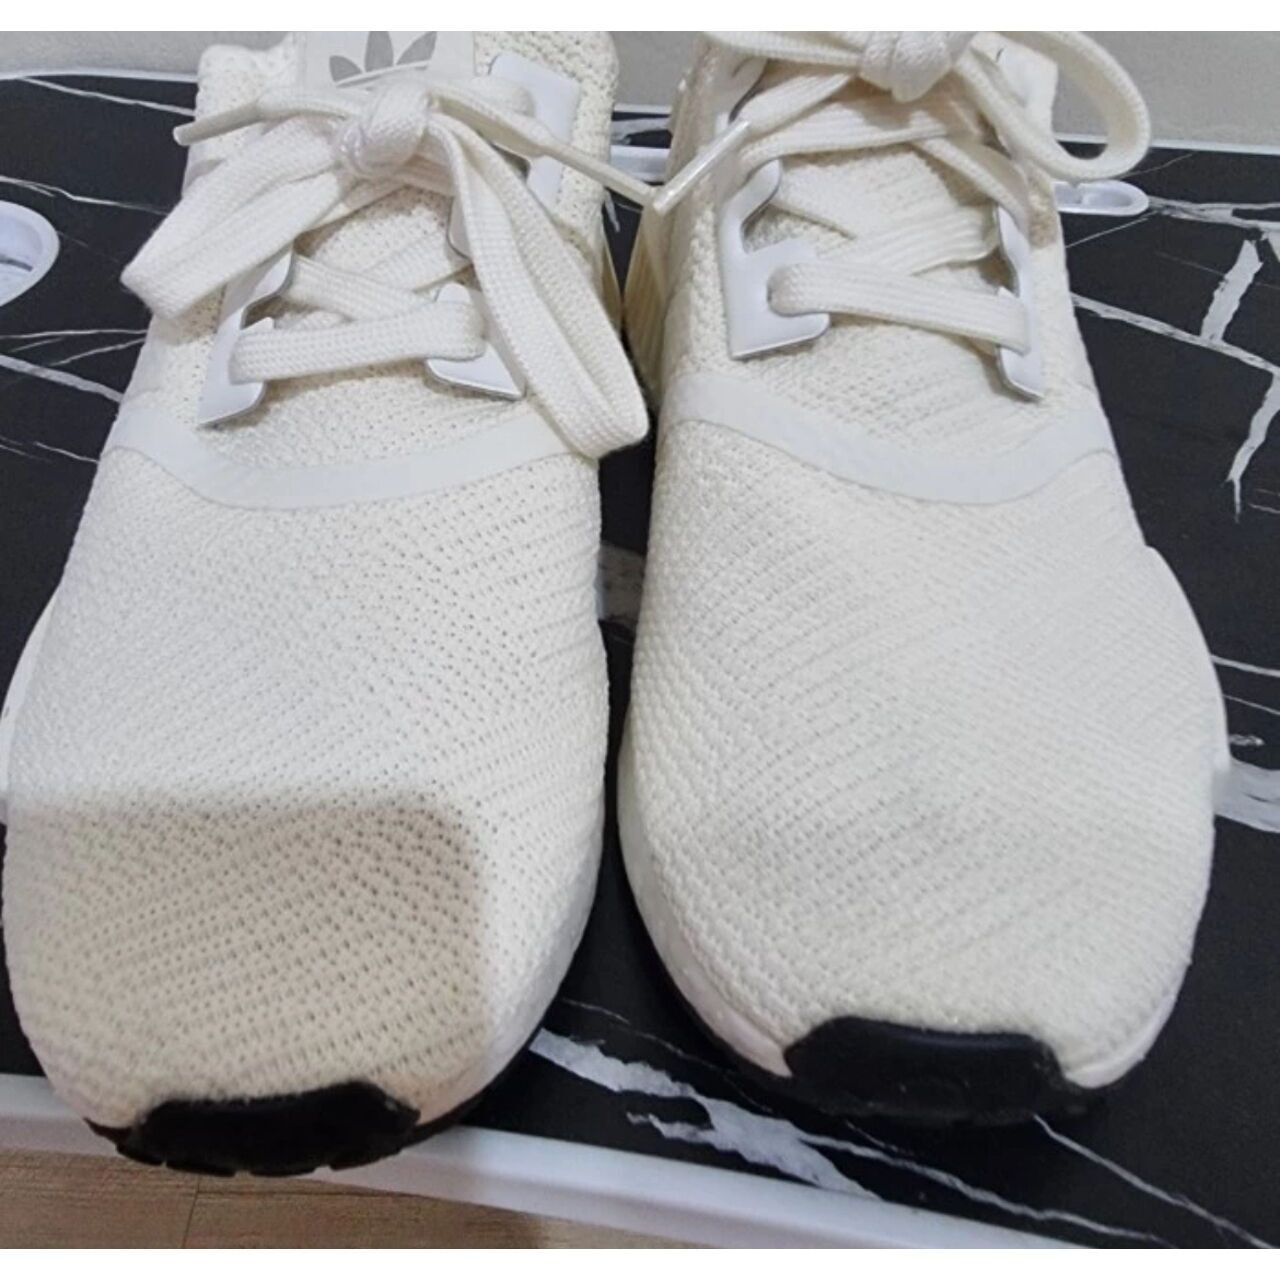 Adidas NMD R1 EE5174 Boost Off White Gold